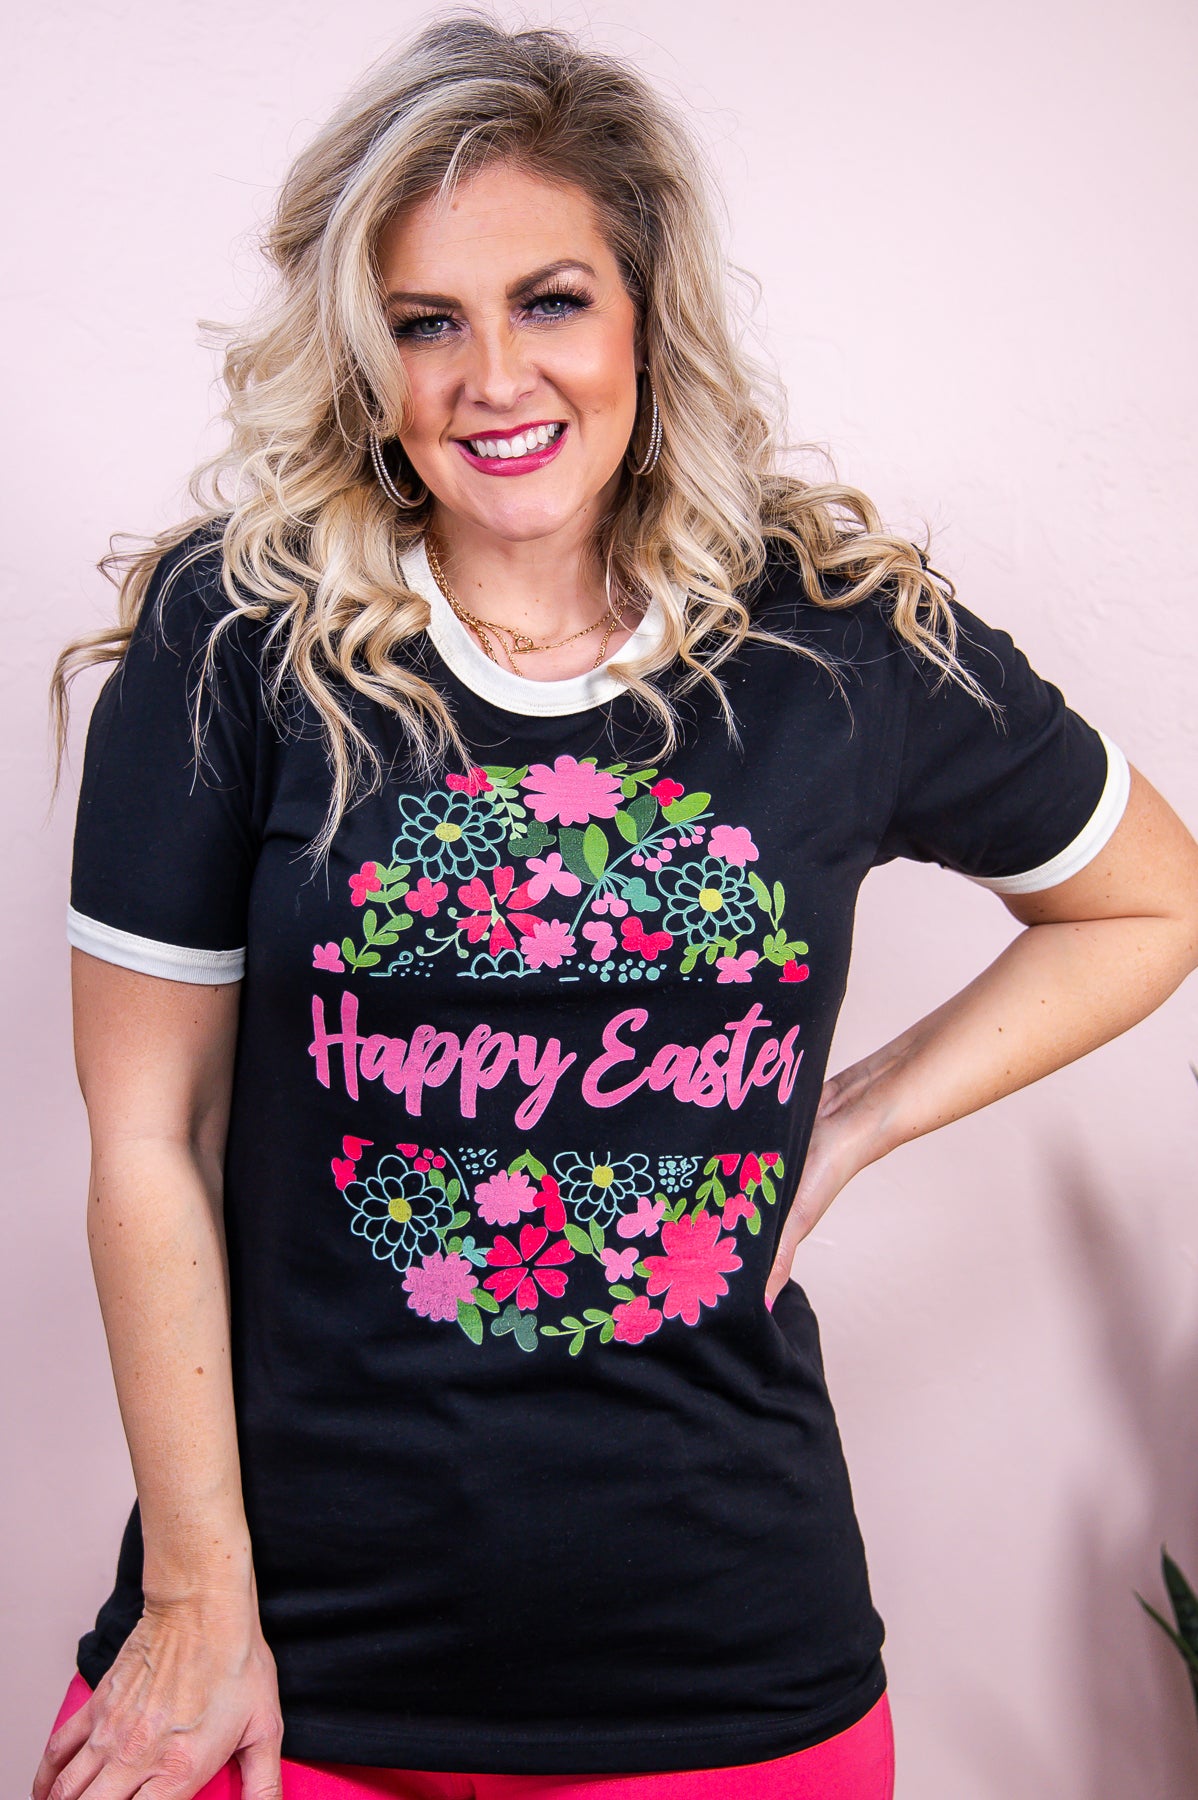 Happy Easter Black Easter Black/Natural Graphic Tee - A3234BK/NA